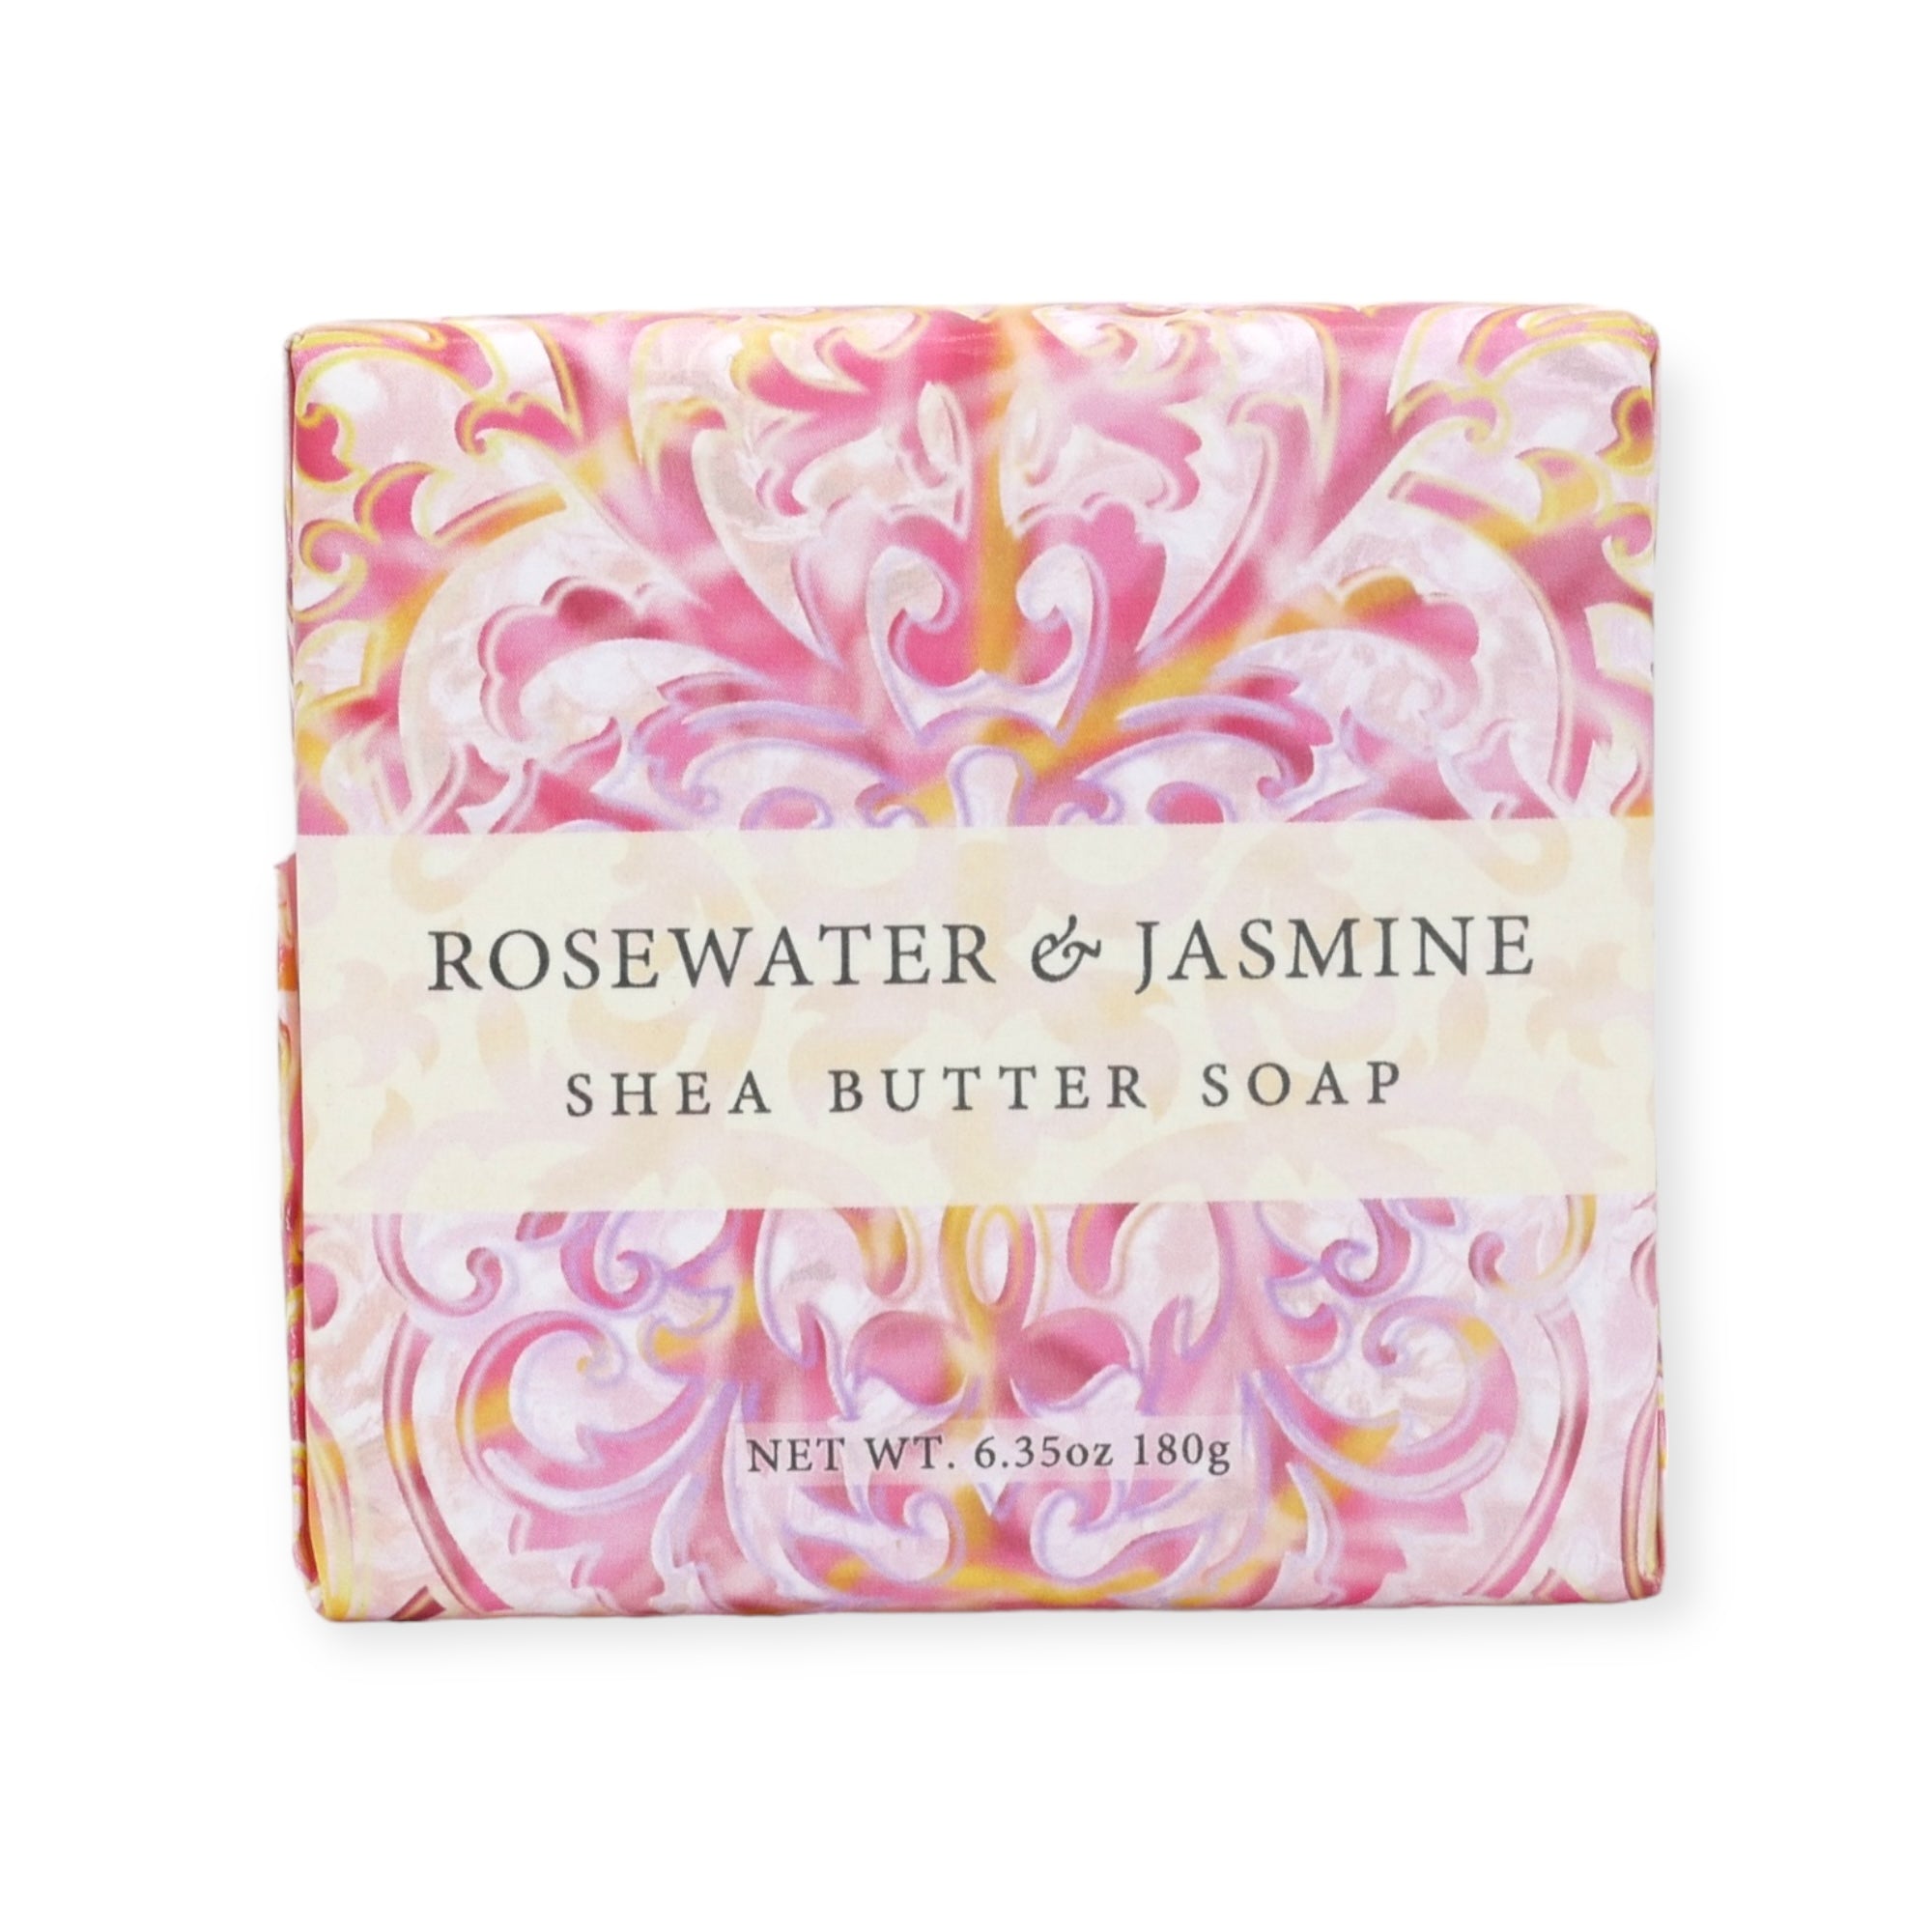 Rosewater & Jasmine Shea Butter Soap by Greenwich Bay Trading Co.